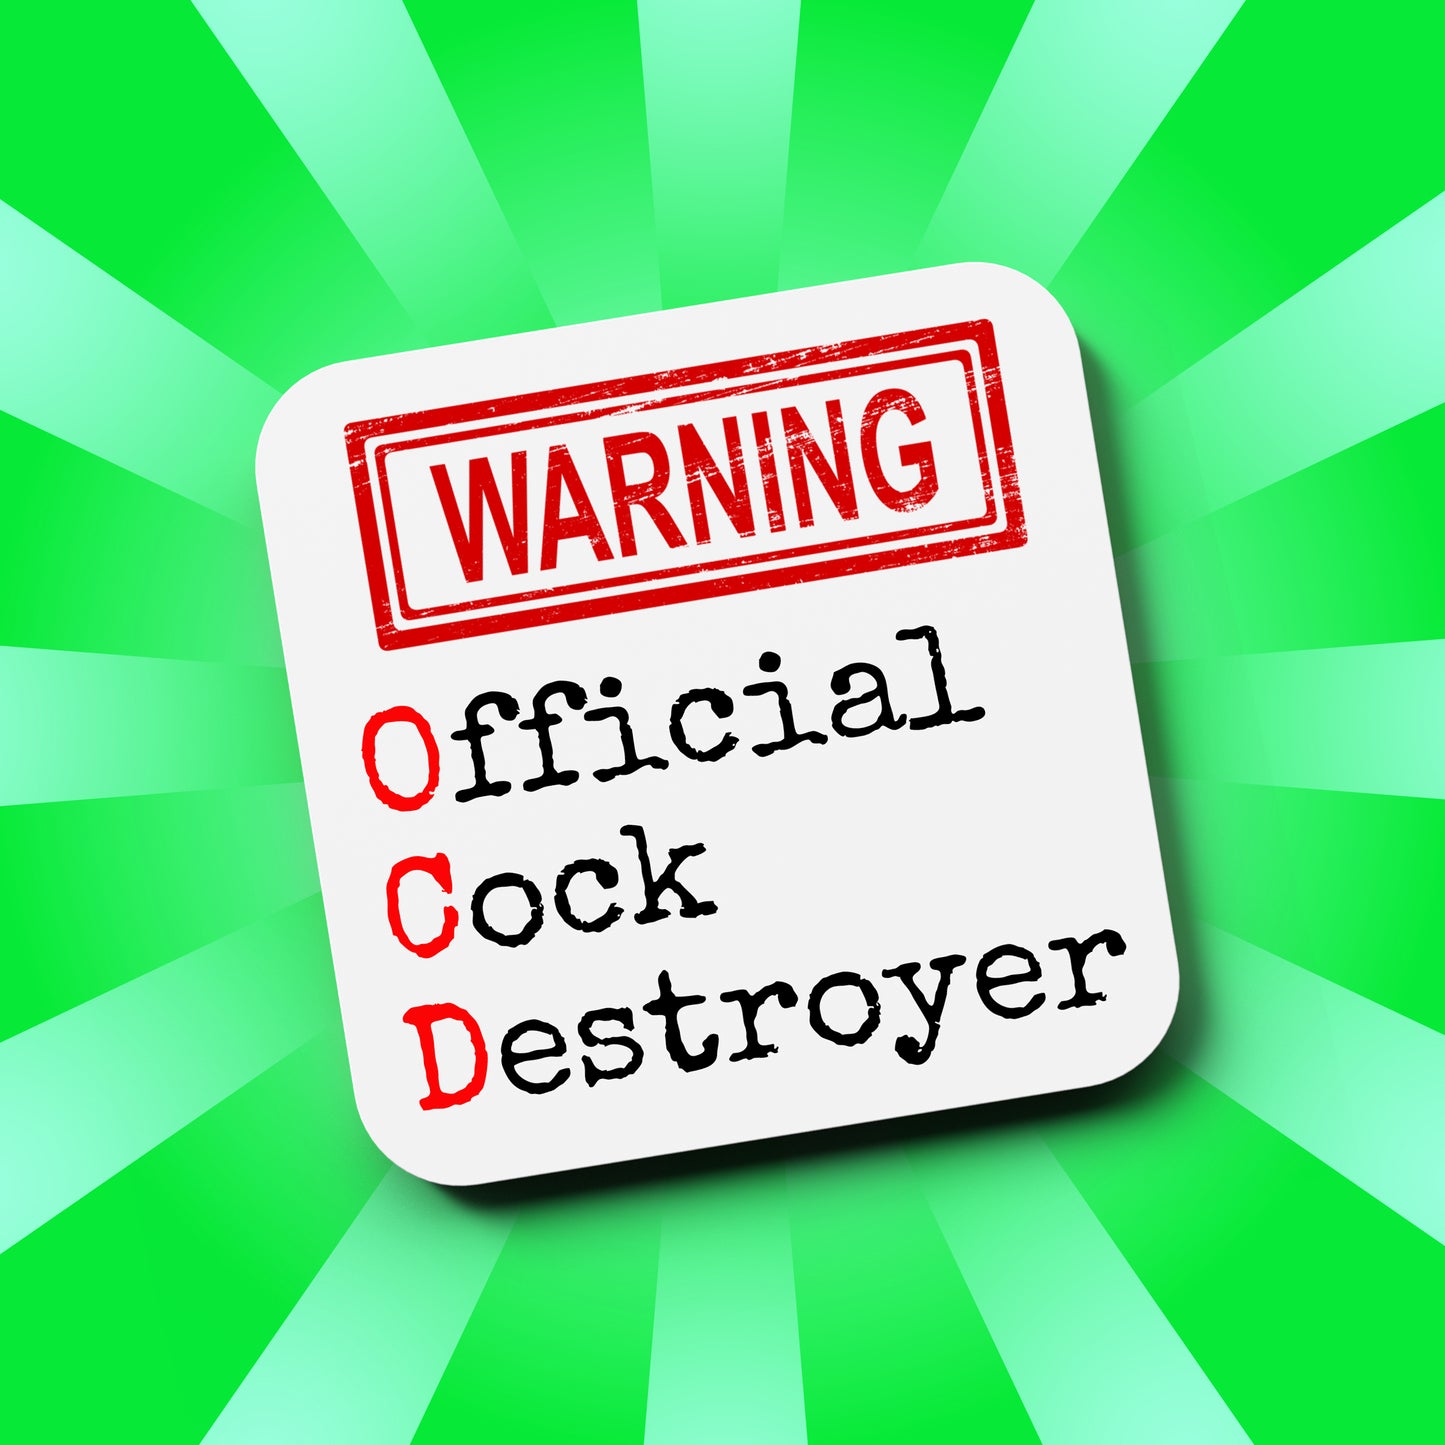 WARNING Official Cock Destroyer